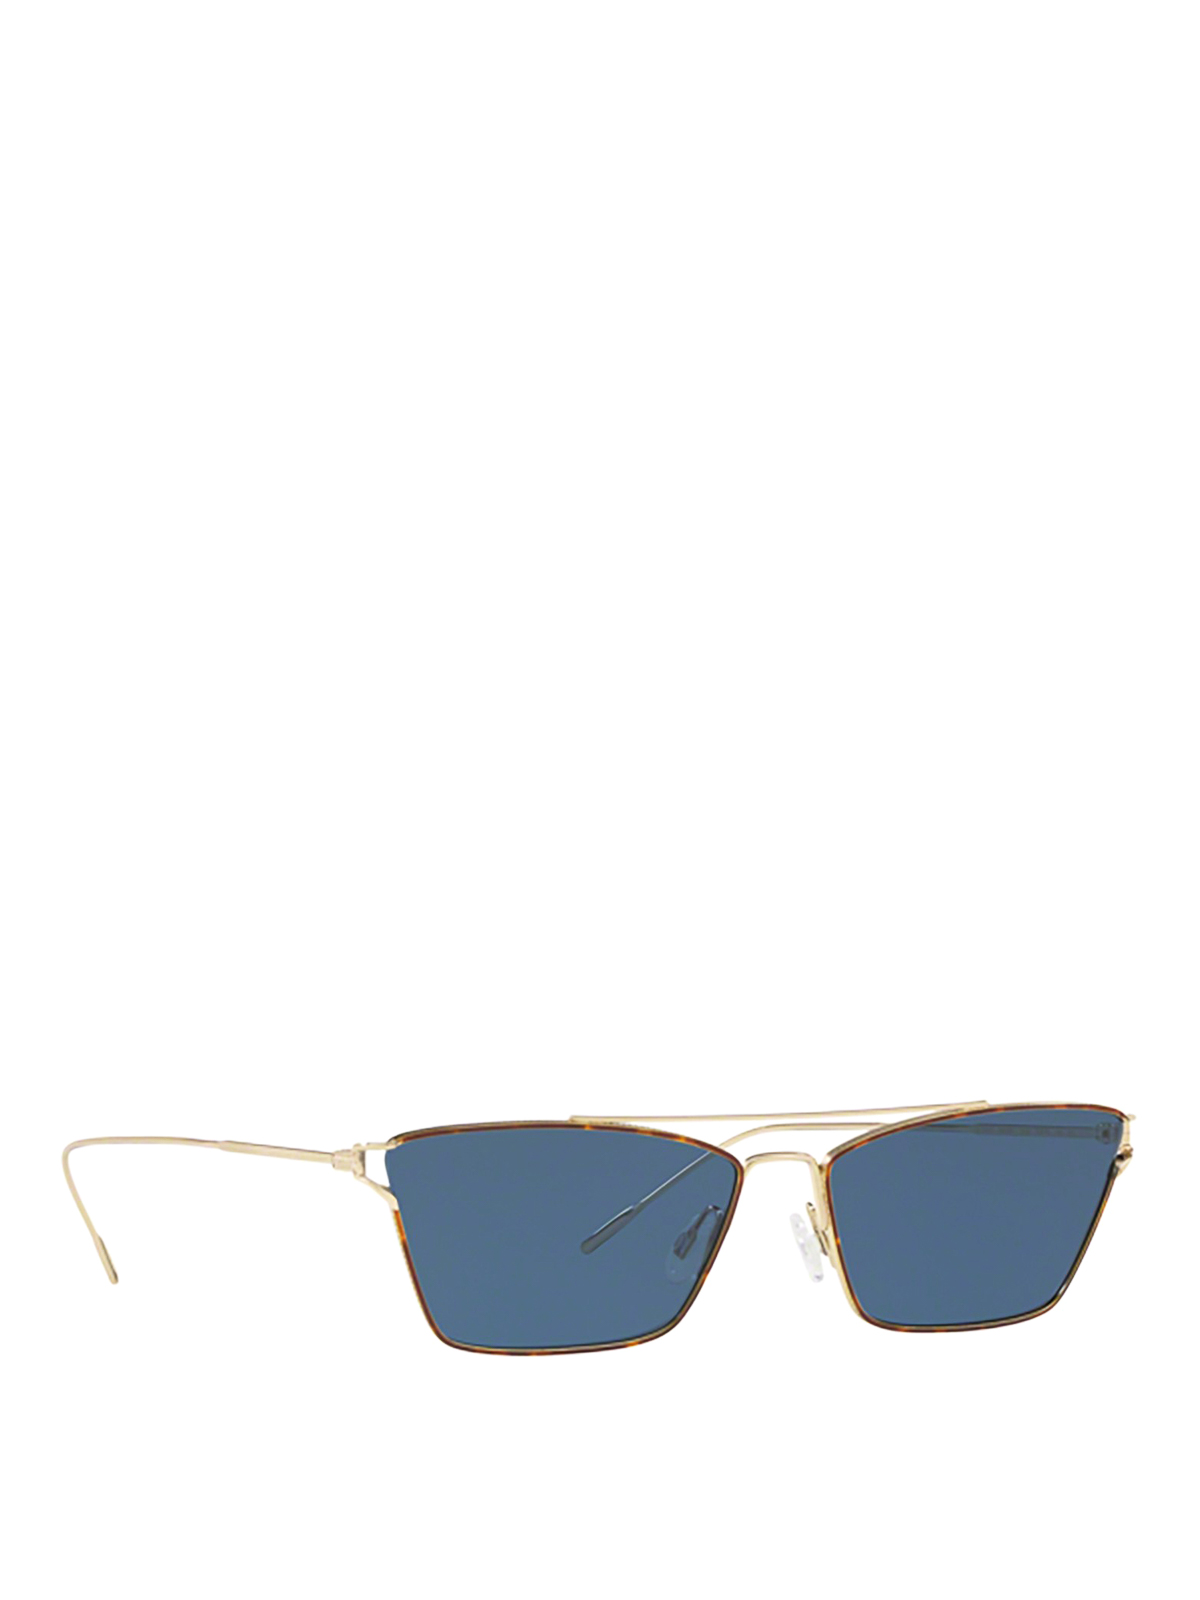 Sunglasses Oliver Peoples - Evey sunglasses with blue lens - OV1244S528380